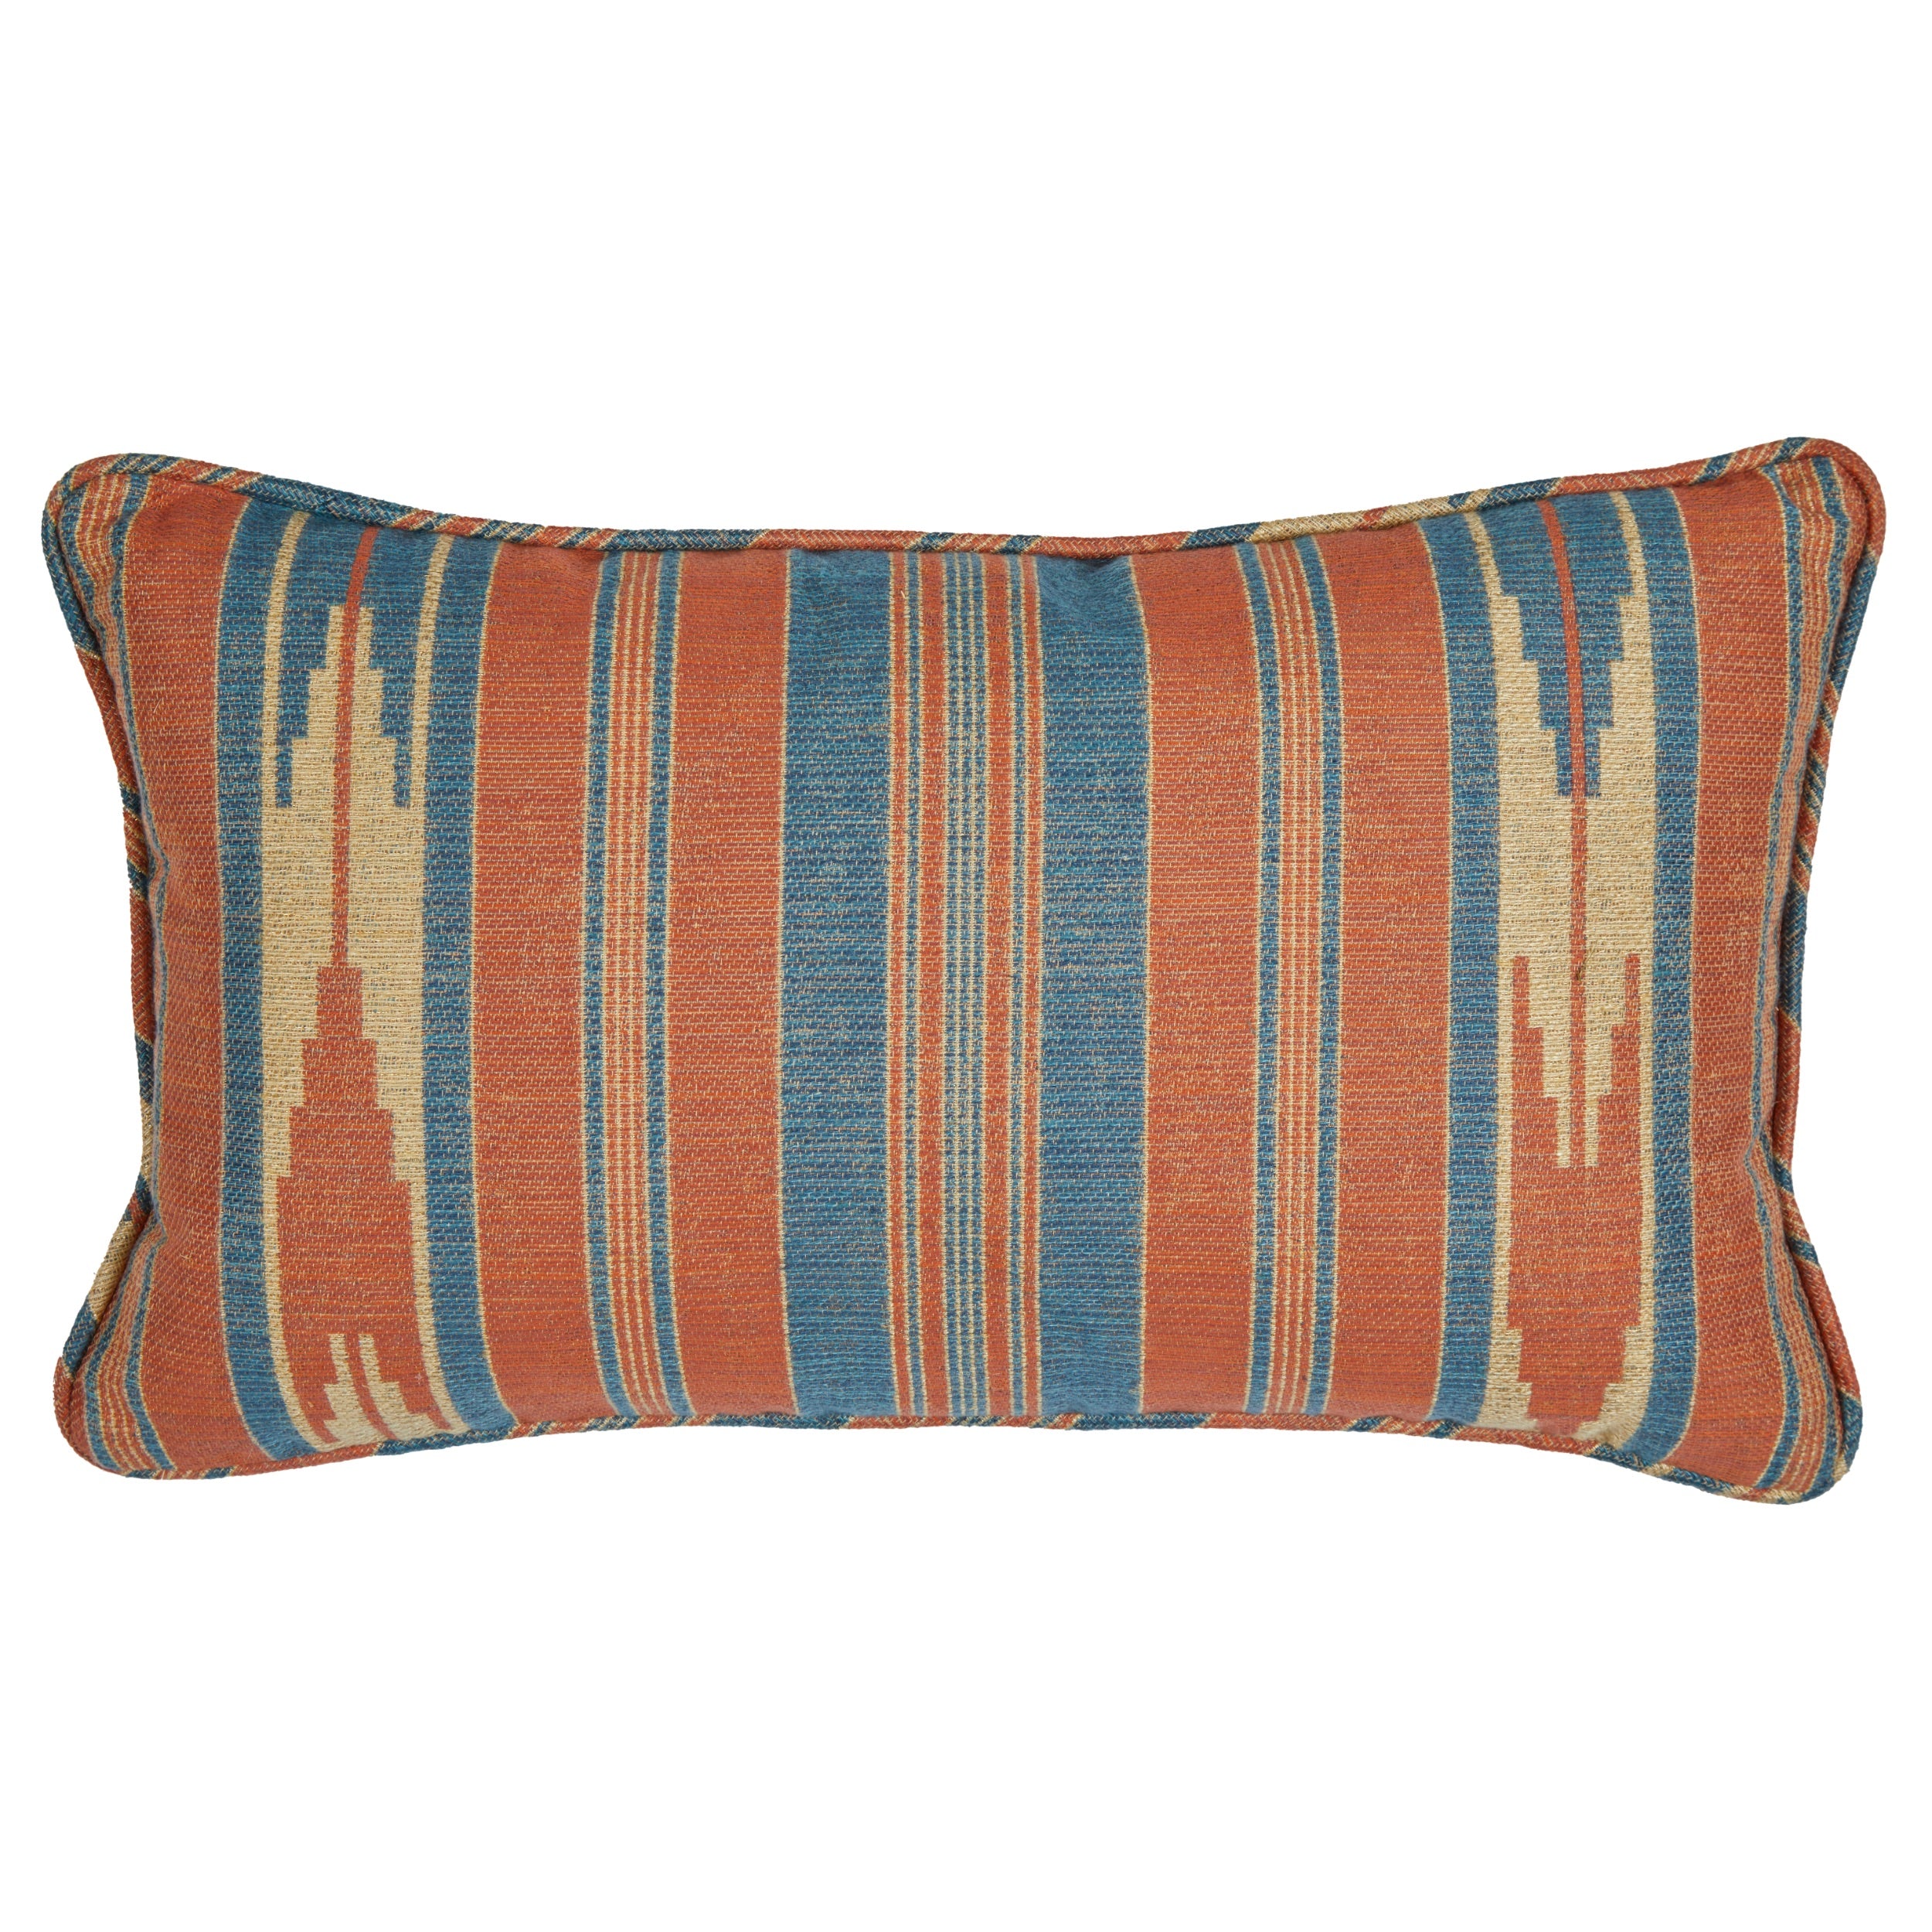 Oulton Stripe Clementine Cushion with Self Piping